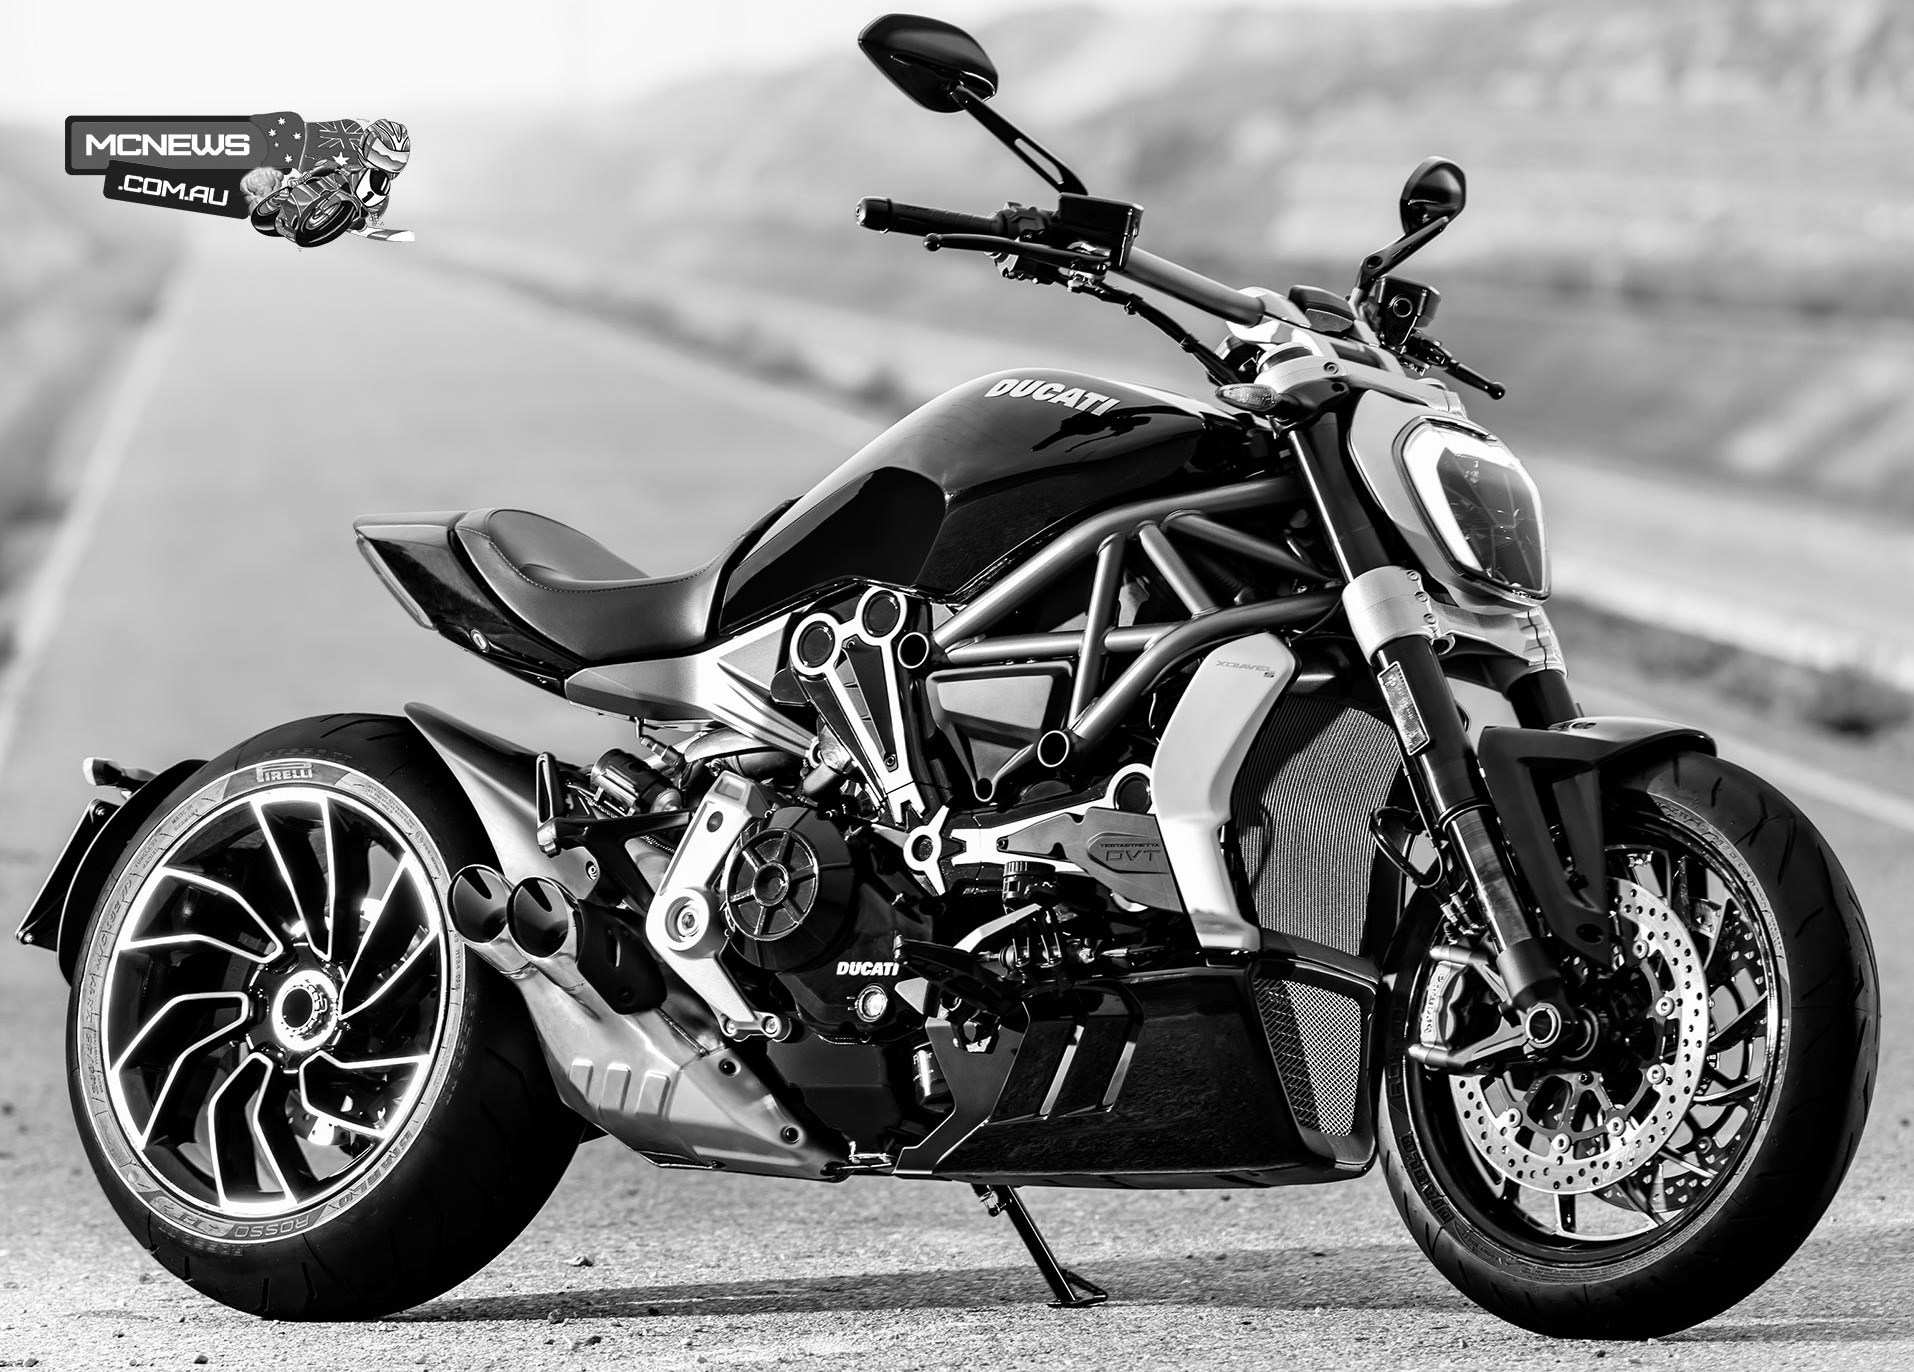 2016-18 XDiavel models recalled for side-stand issue